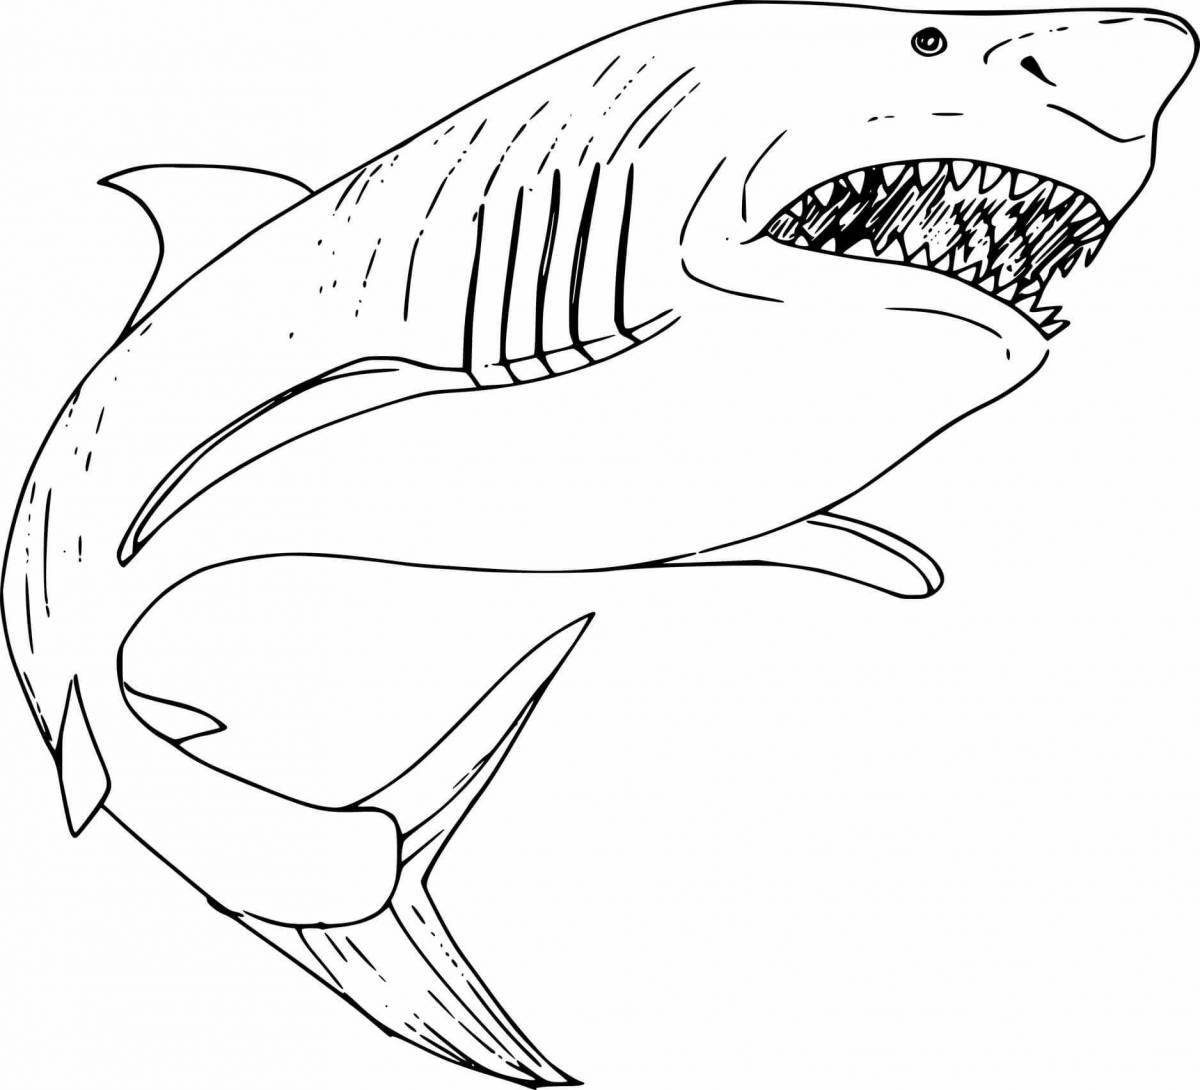 Intriguing tiger shark coloring page